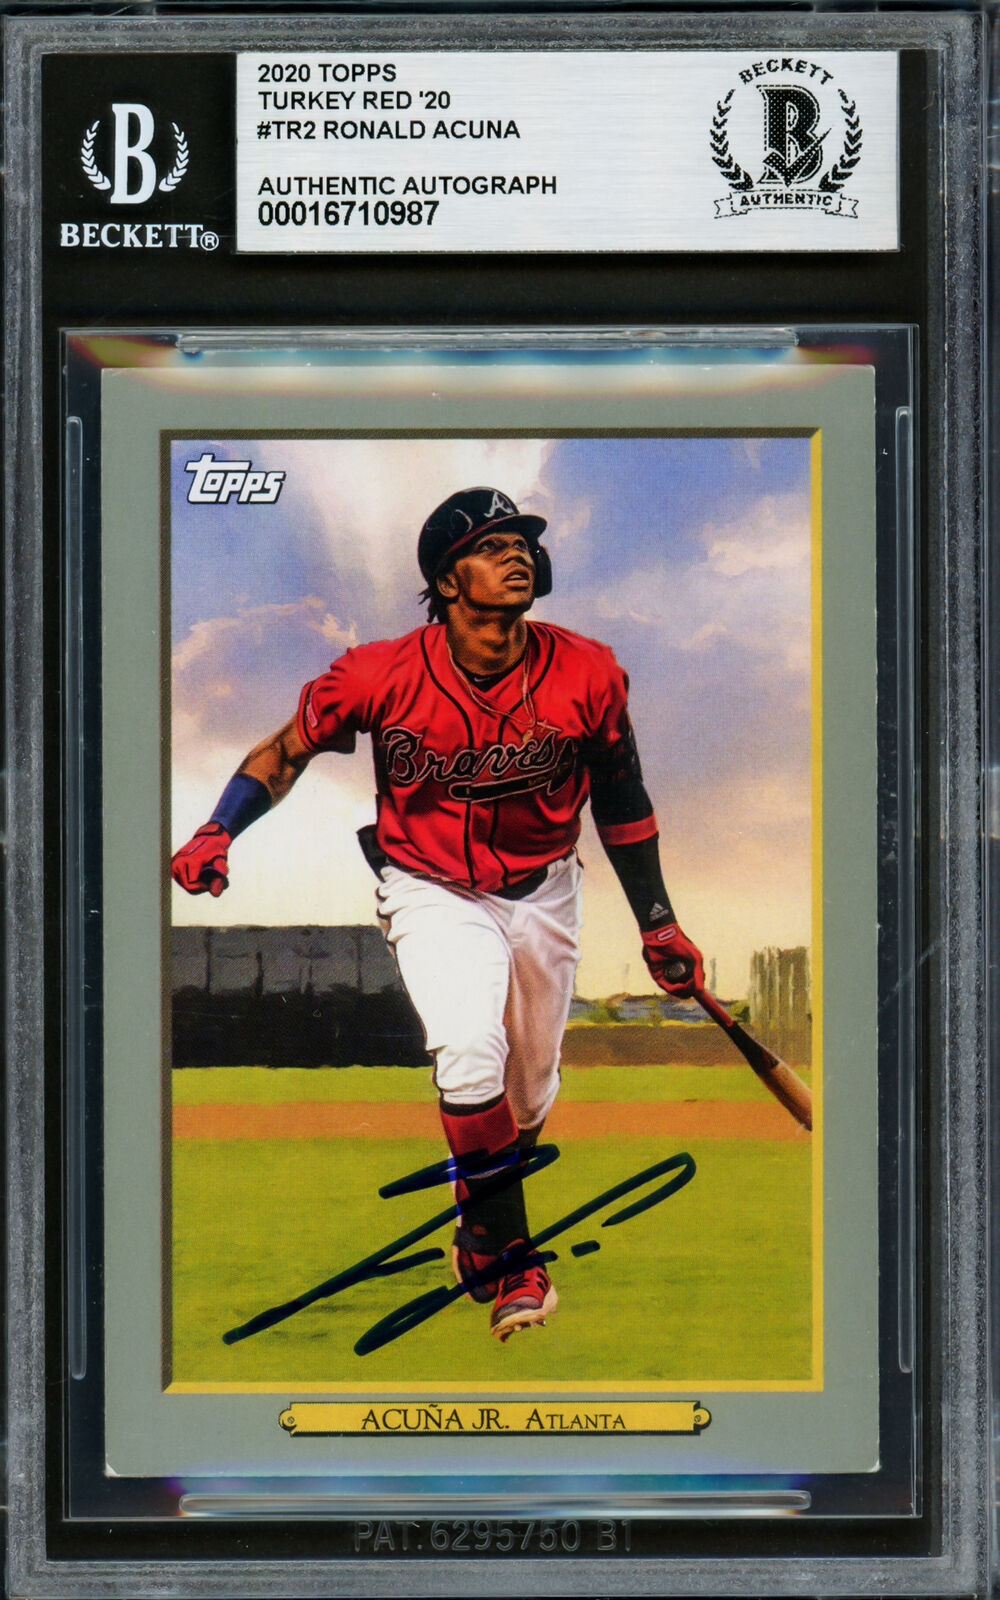 Ronald Acuna Jr. Autographed 2020 Topps Turkey Red Card Braves Beckett #16710987 Image 1